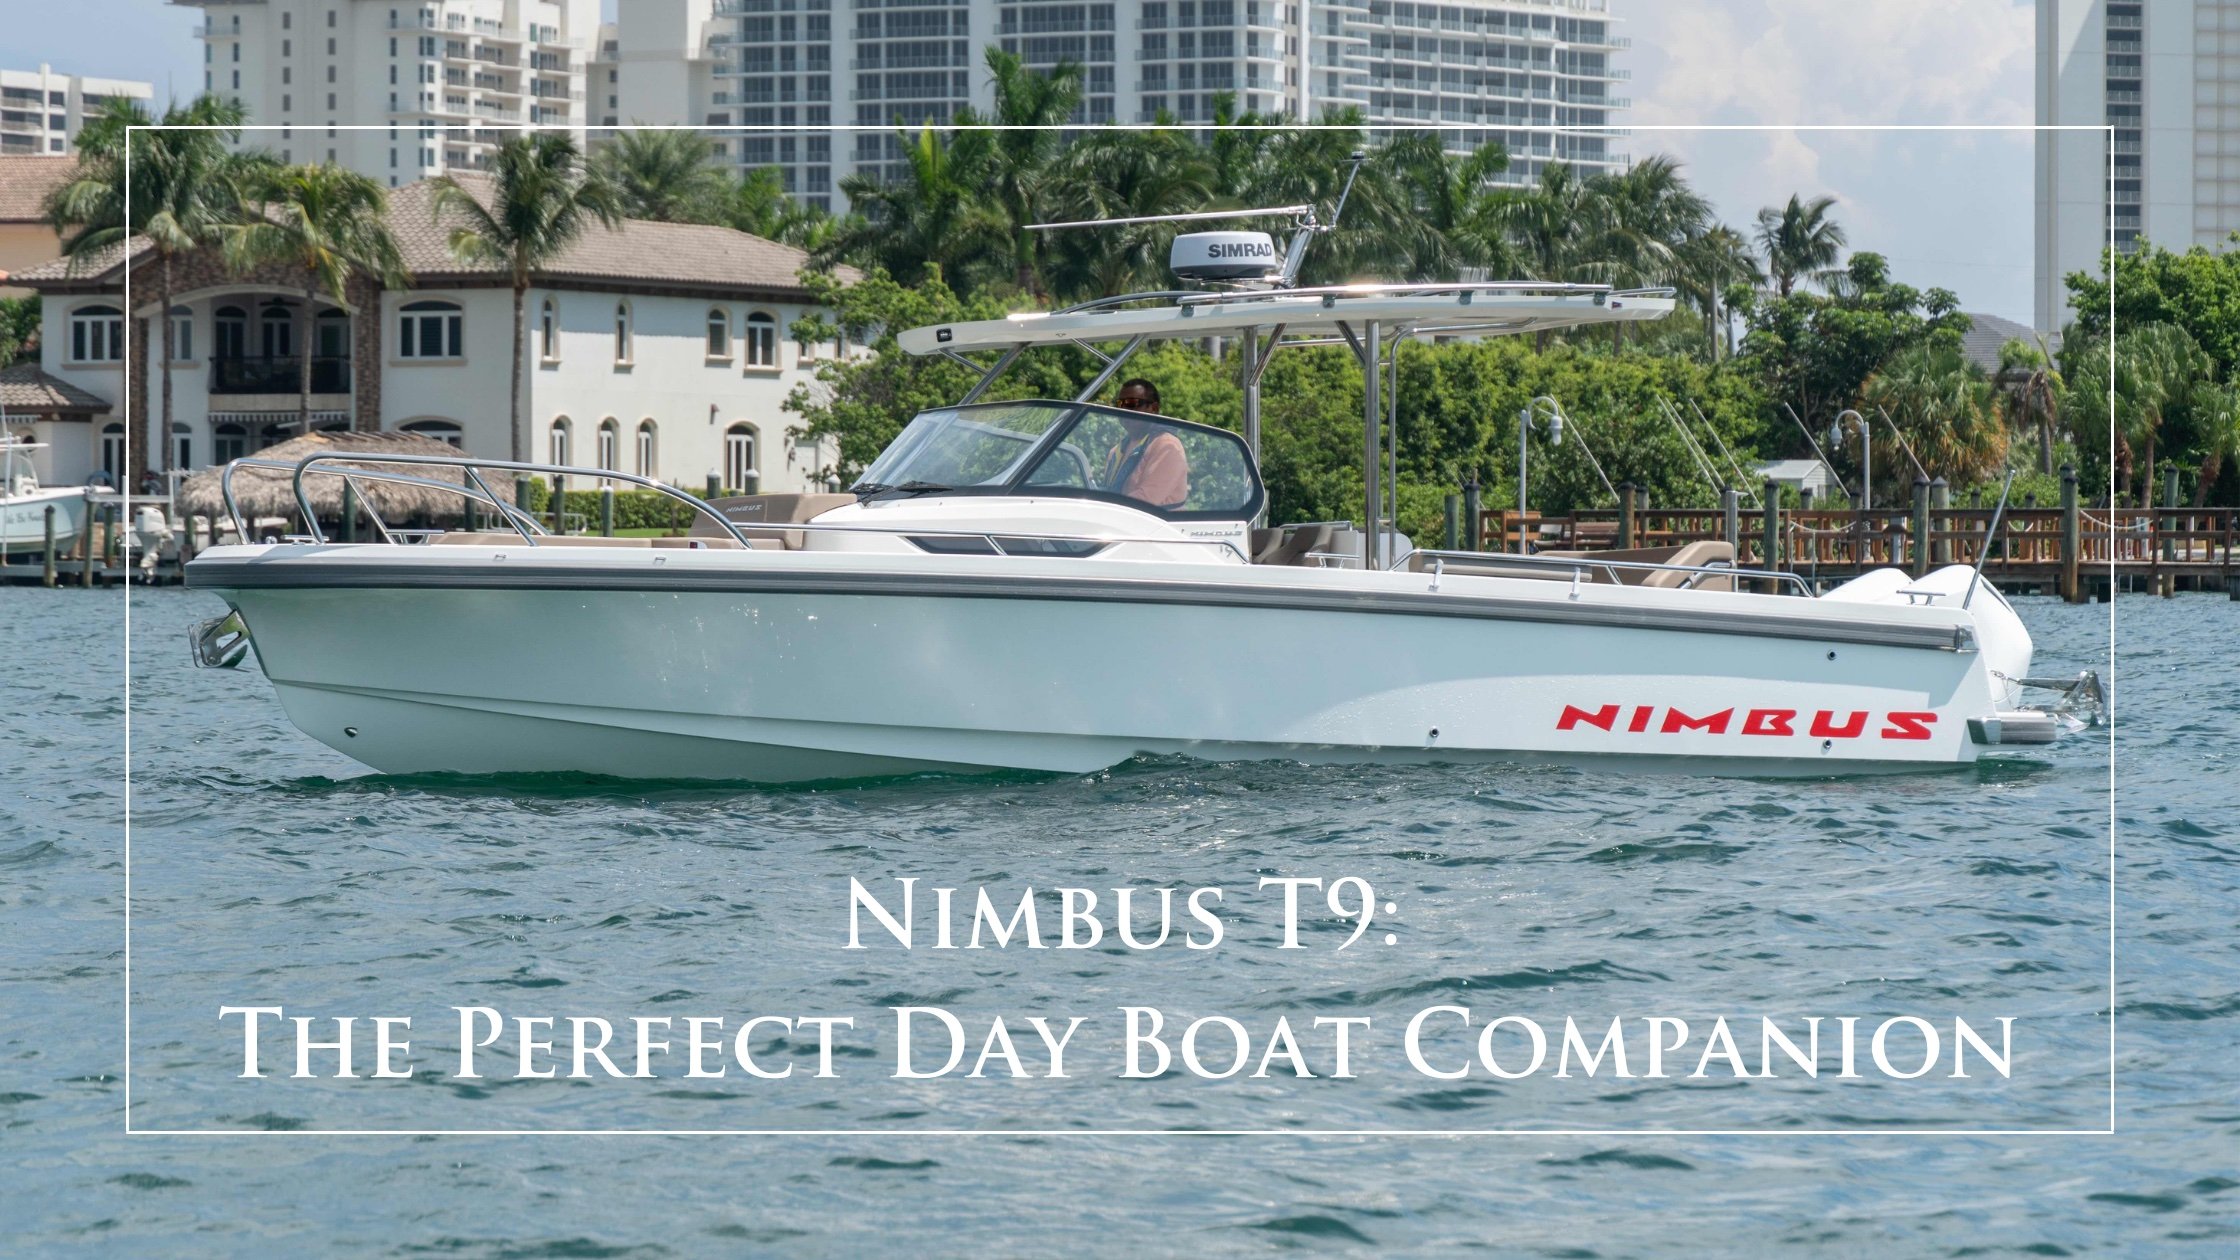 Newest Arrival at the HMY Outboard Boating Center: Nimbus T9 Your Perfect Day Boat Companion